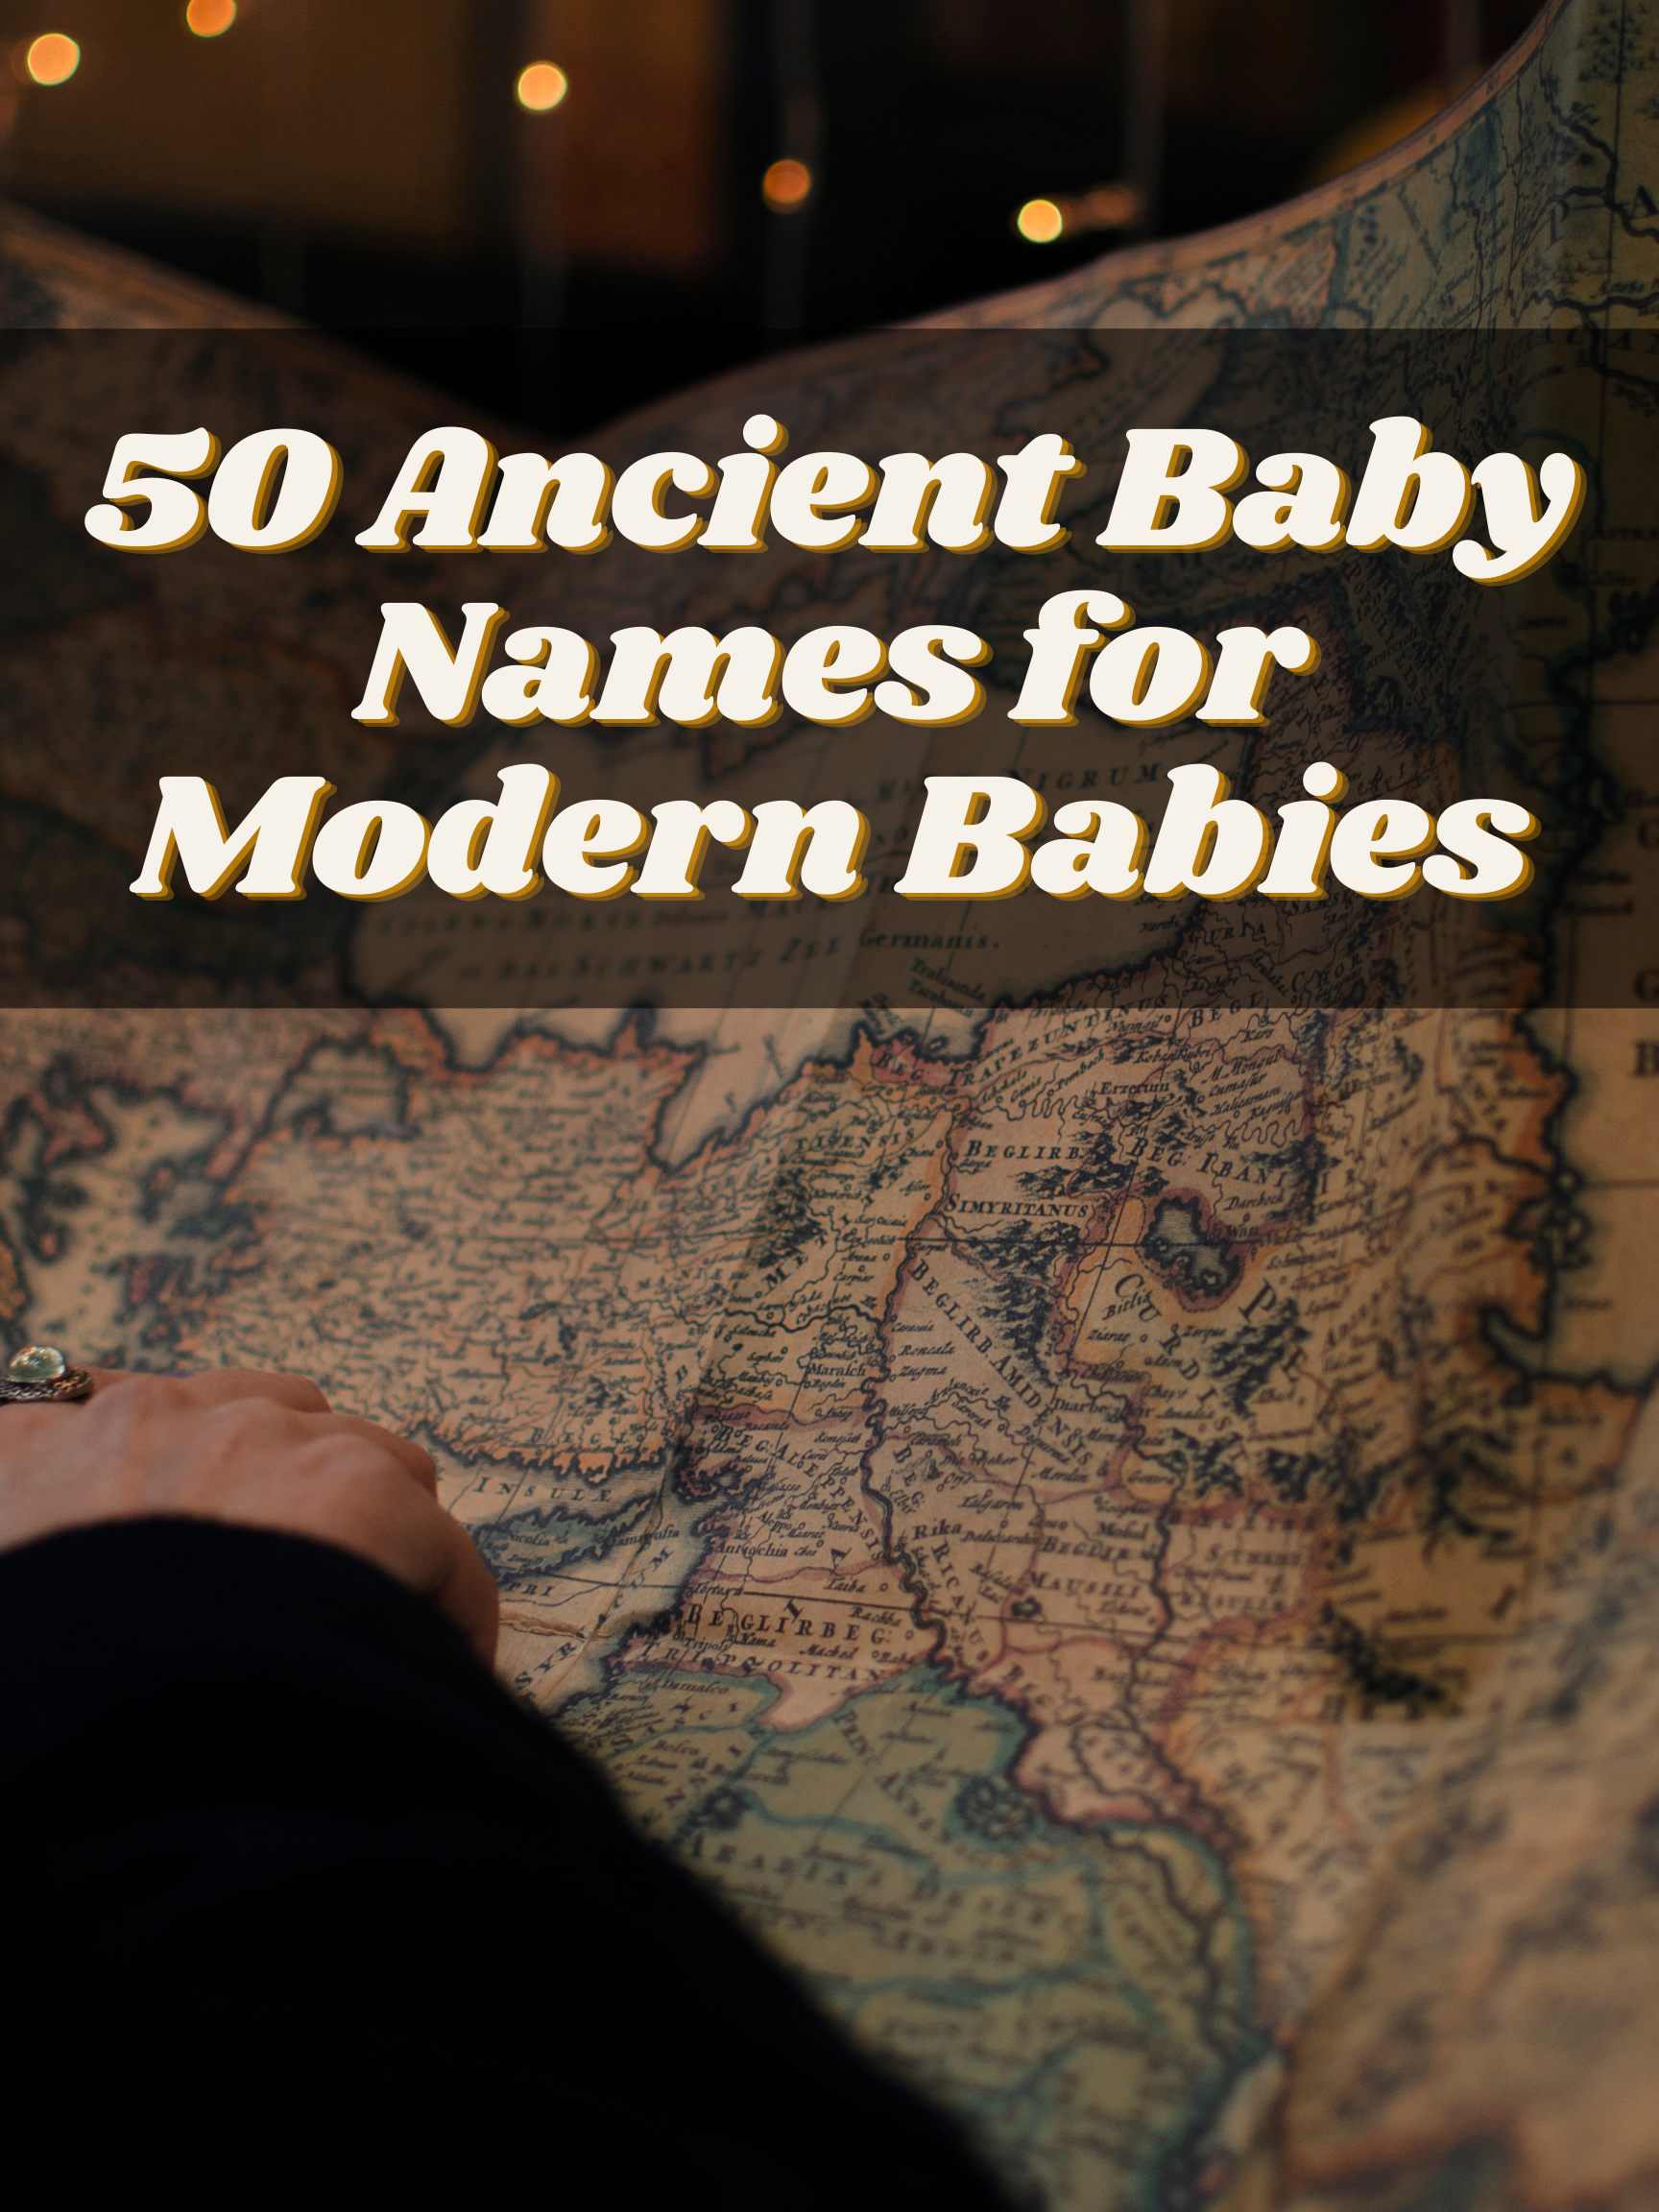 50 Ancient Baby Names for Modern Babies